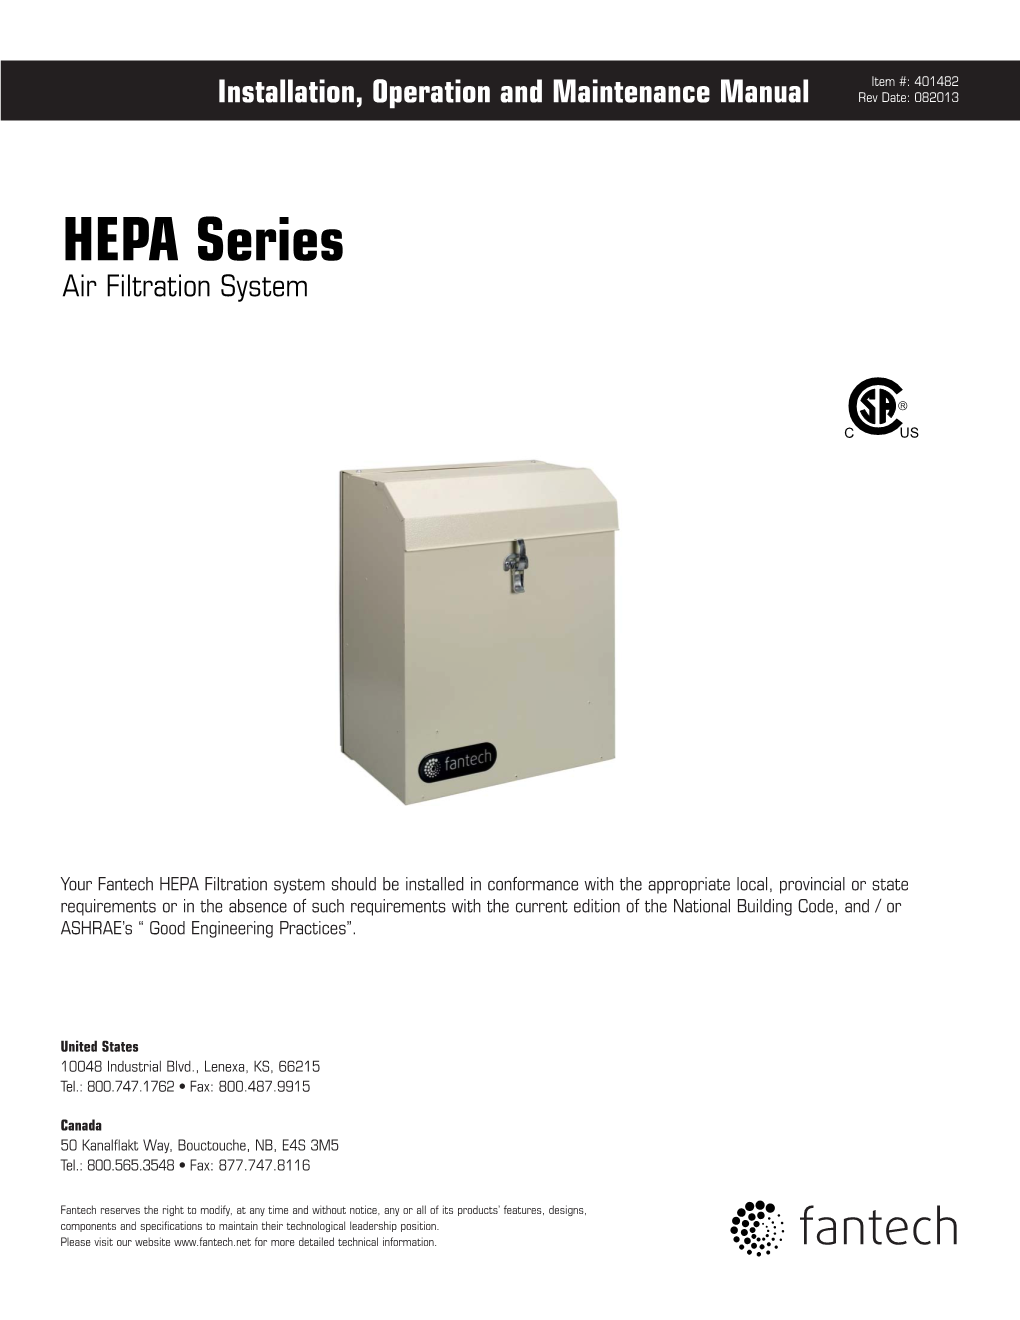 HEPA Series Air Filtration System